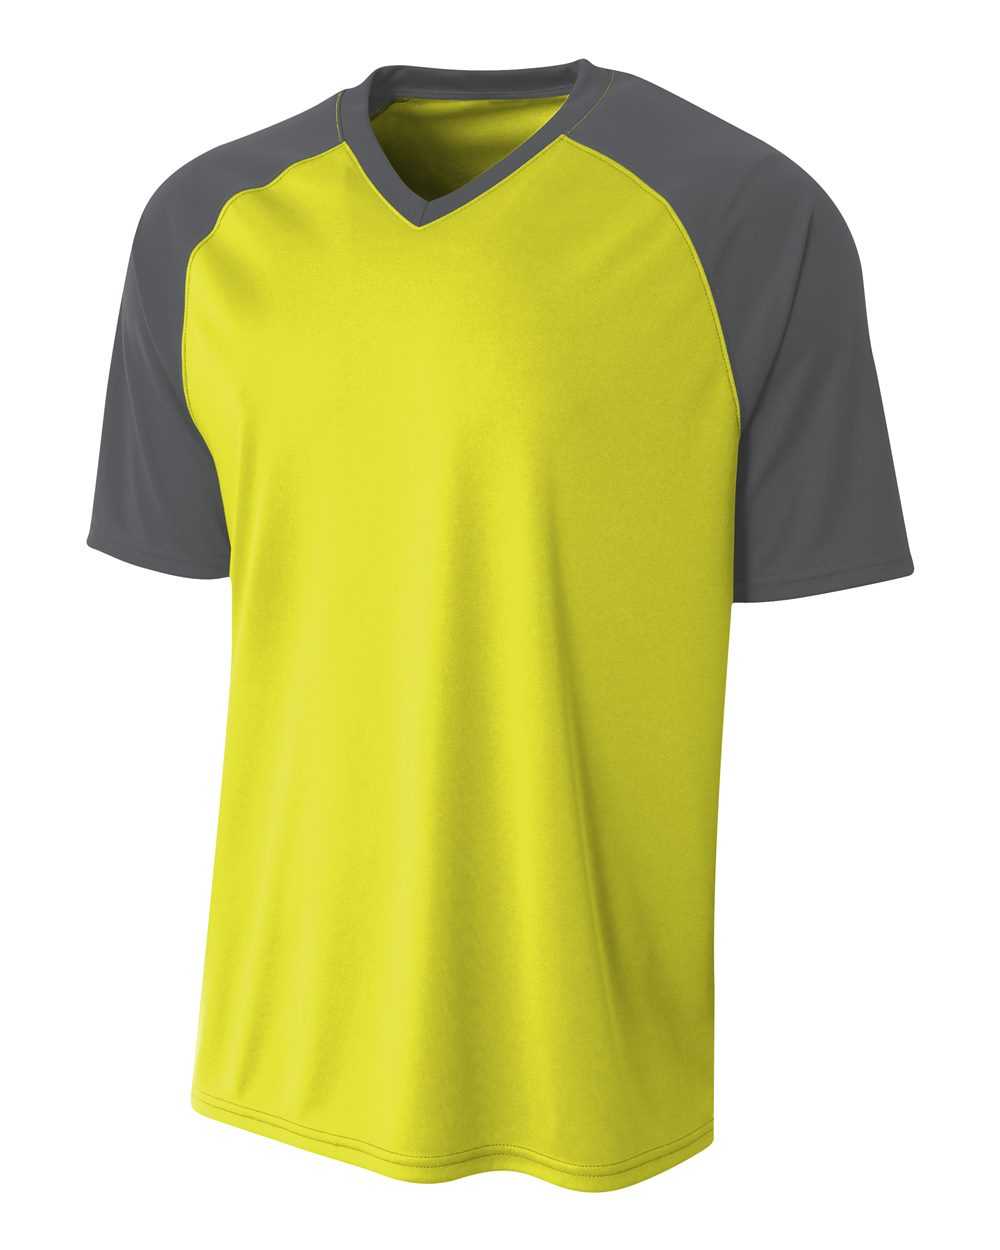 A4 N3373 Strike Jersey - Safety Yellow Graphite - HIT a Double